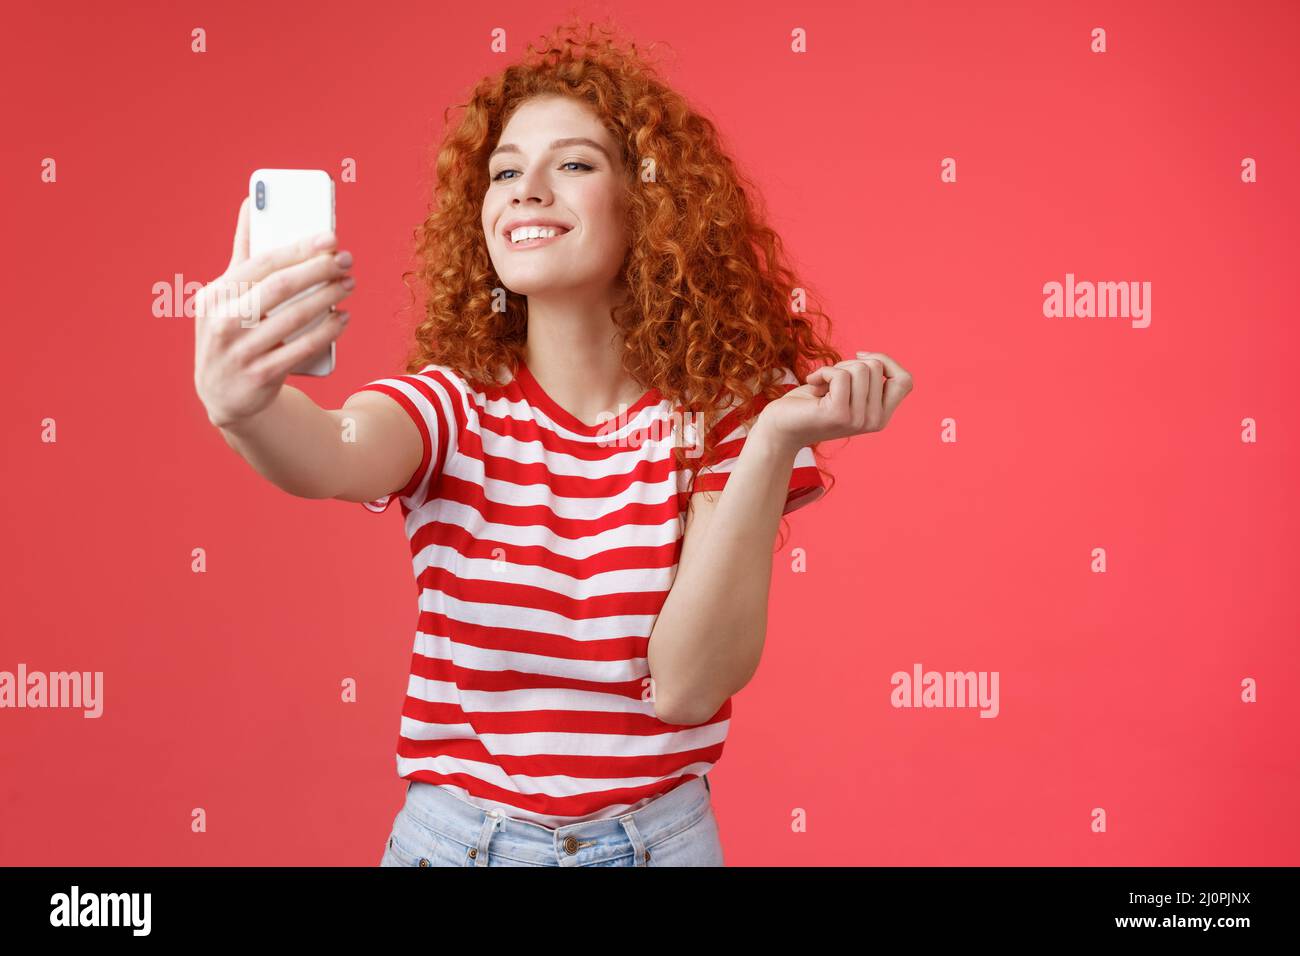 Cute pleased happy good-looking redhead ginger girl curly hairstyle smiling perfect toothy grin posing delighted amused hold sma Stock Photo